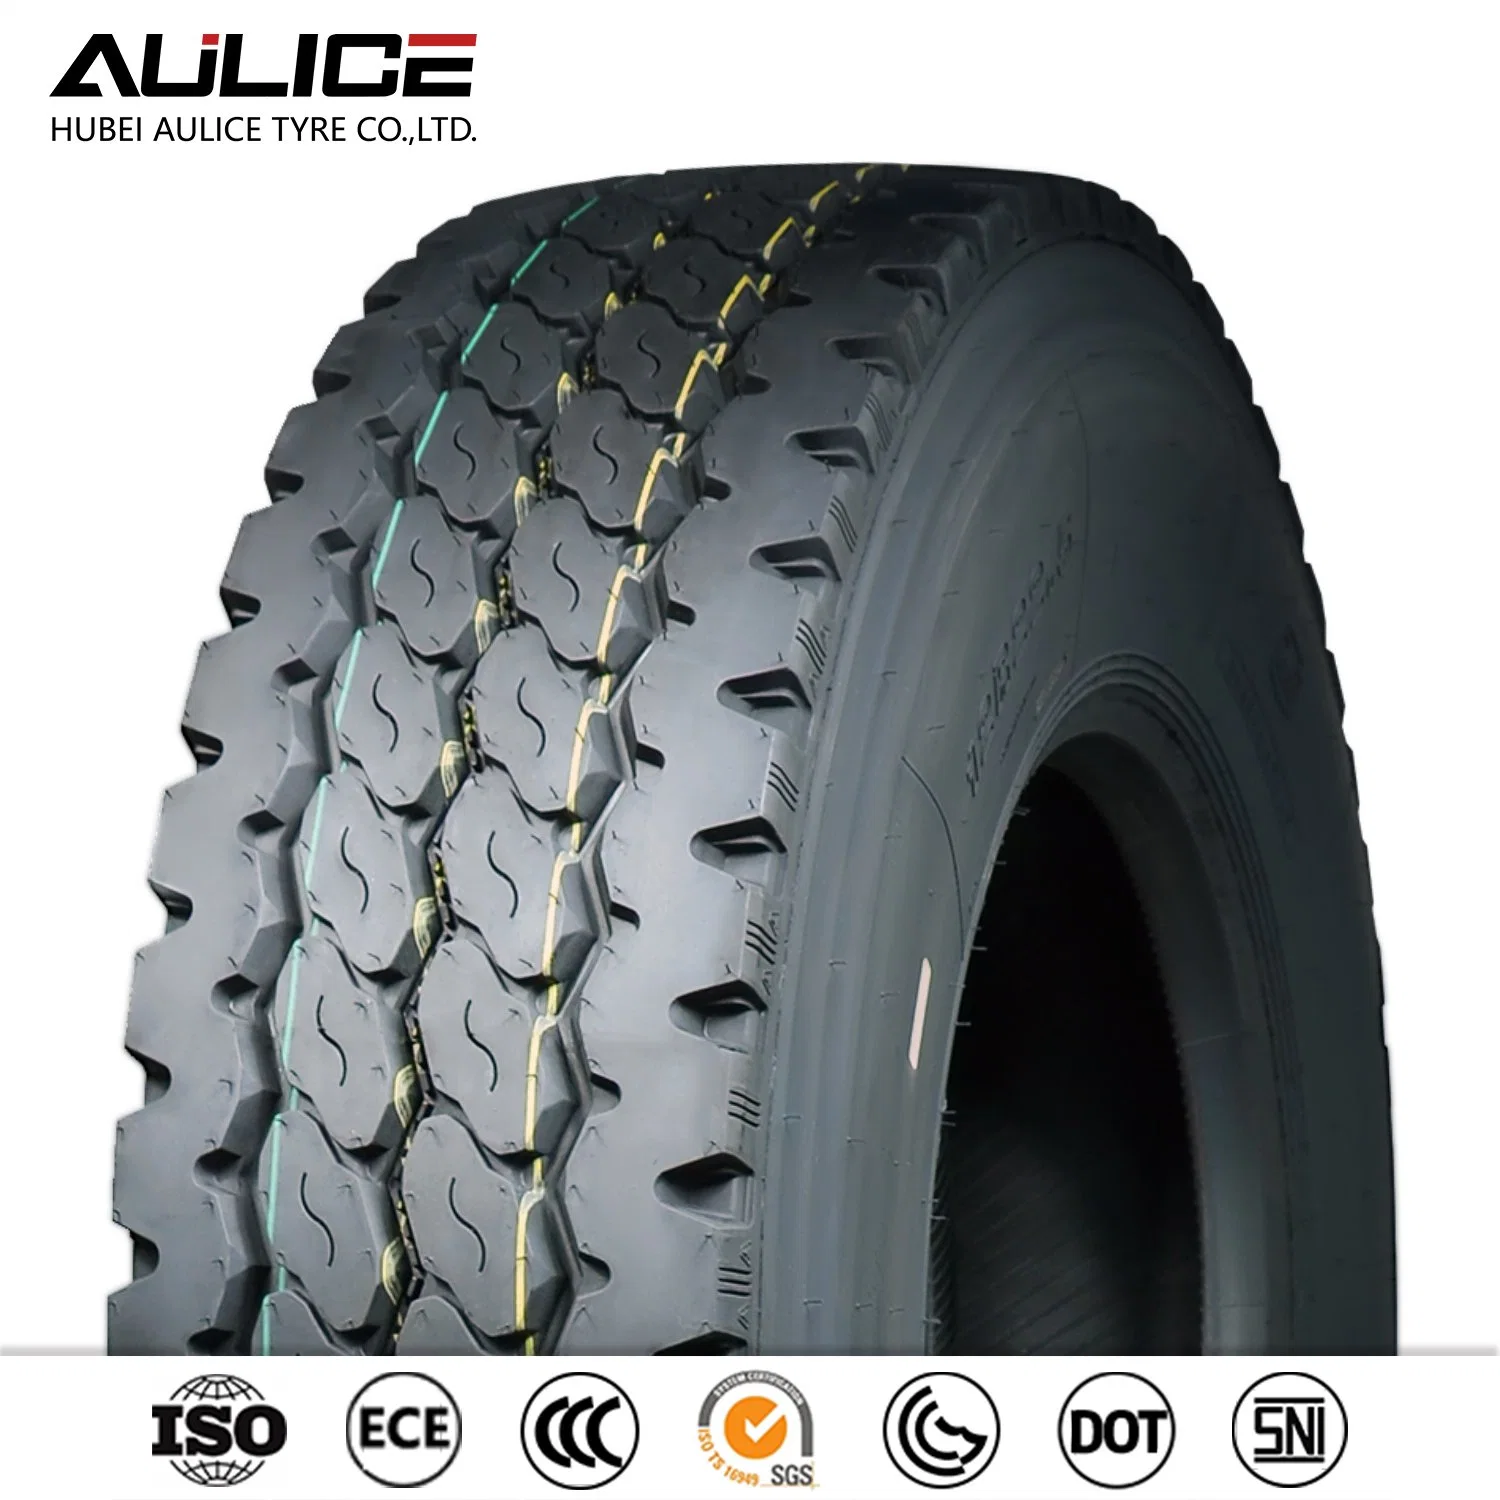 AULICE High Quliaty Cheap Price All Steel Radial Truck Tyre/Mining/Bus/OTR tyre factory/TBR Truck Tires for Indonesia, India, Pakistan, Myanmar market